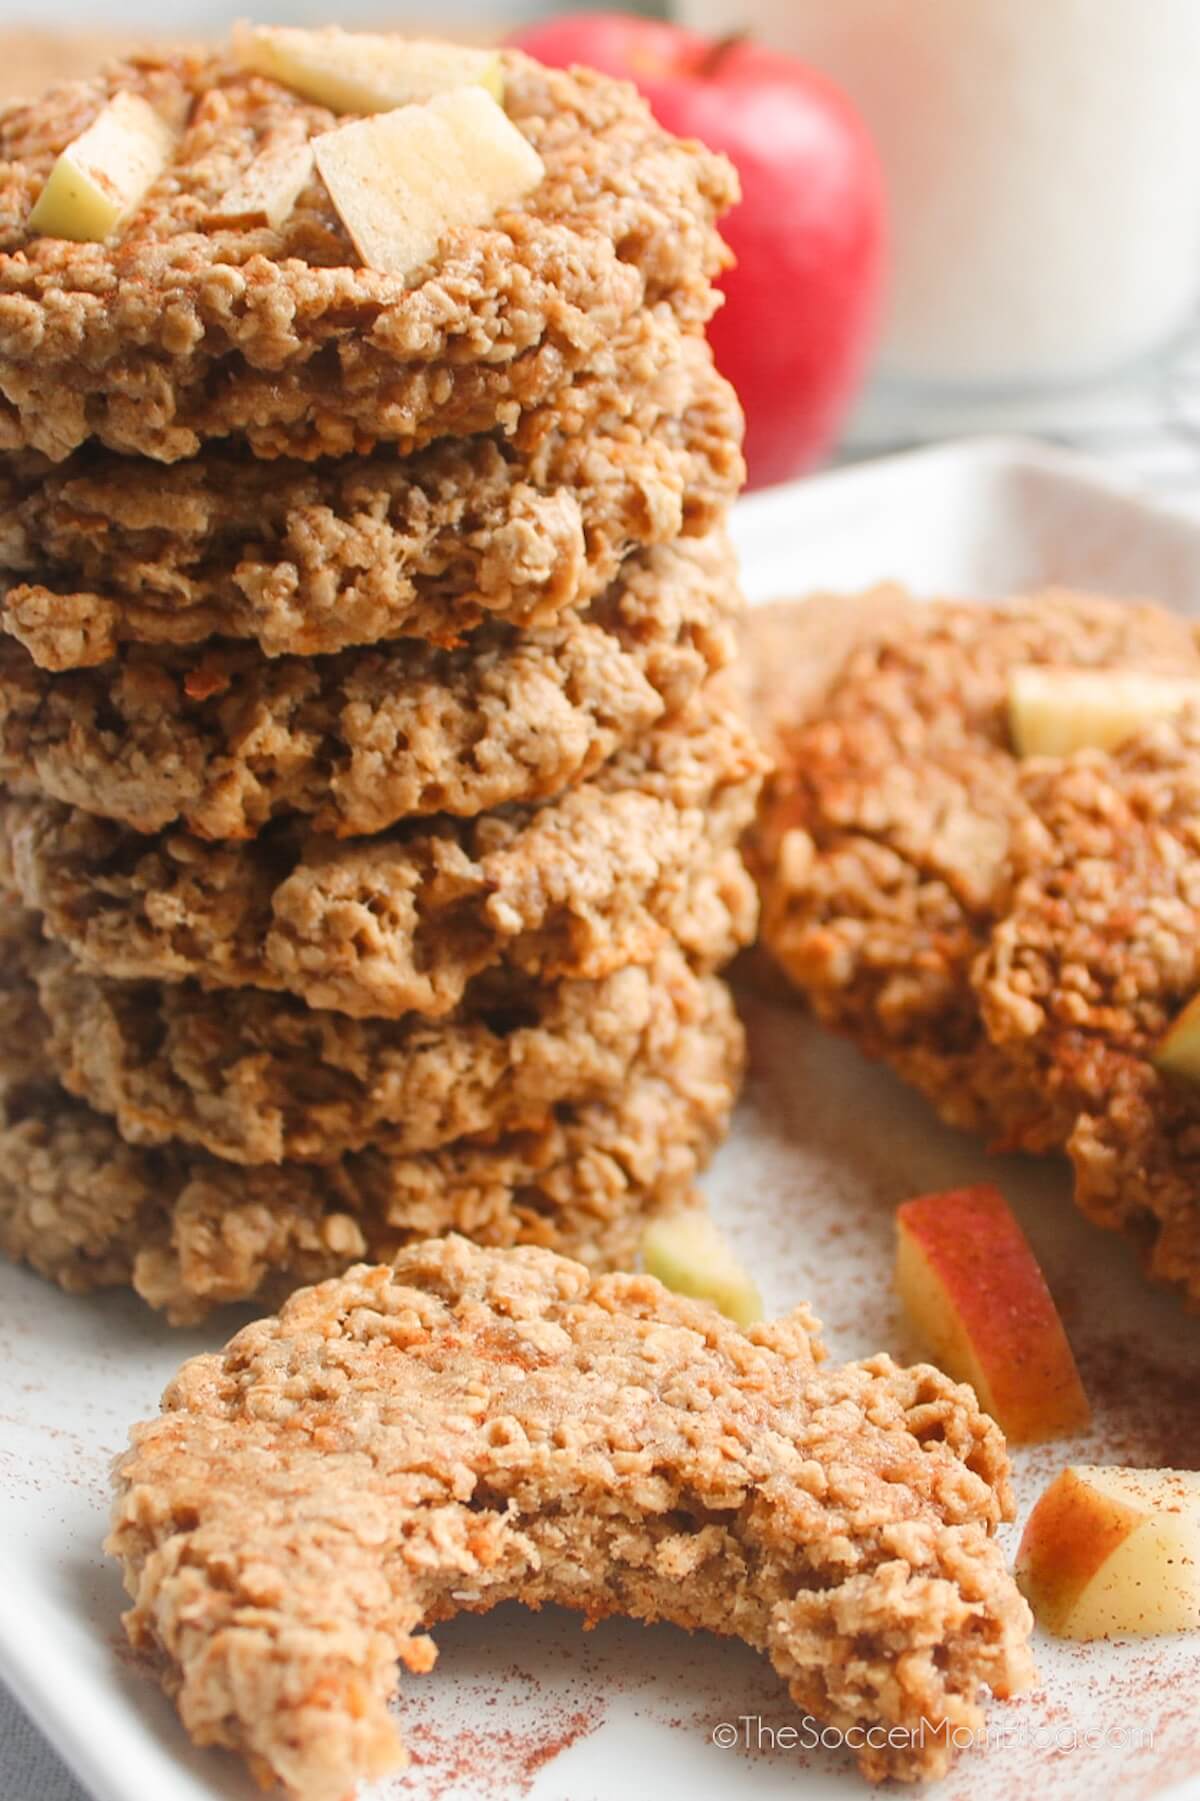 stack of apple oatmeal cookies, one in front has a bite missing